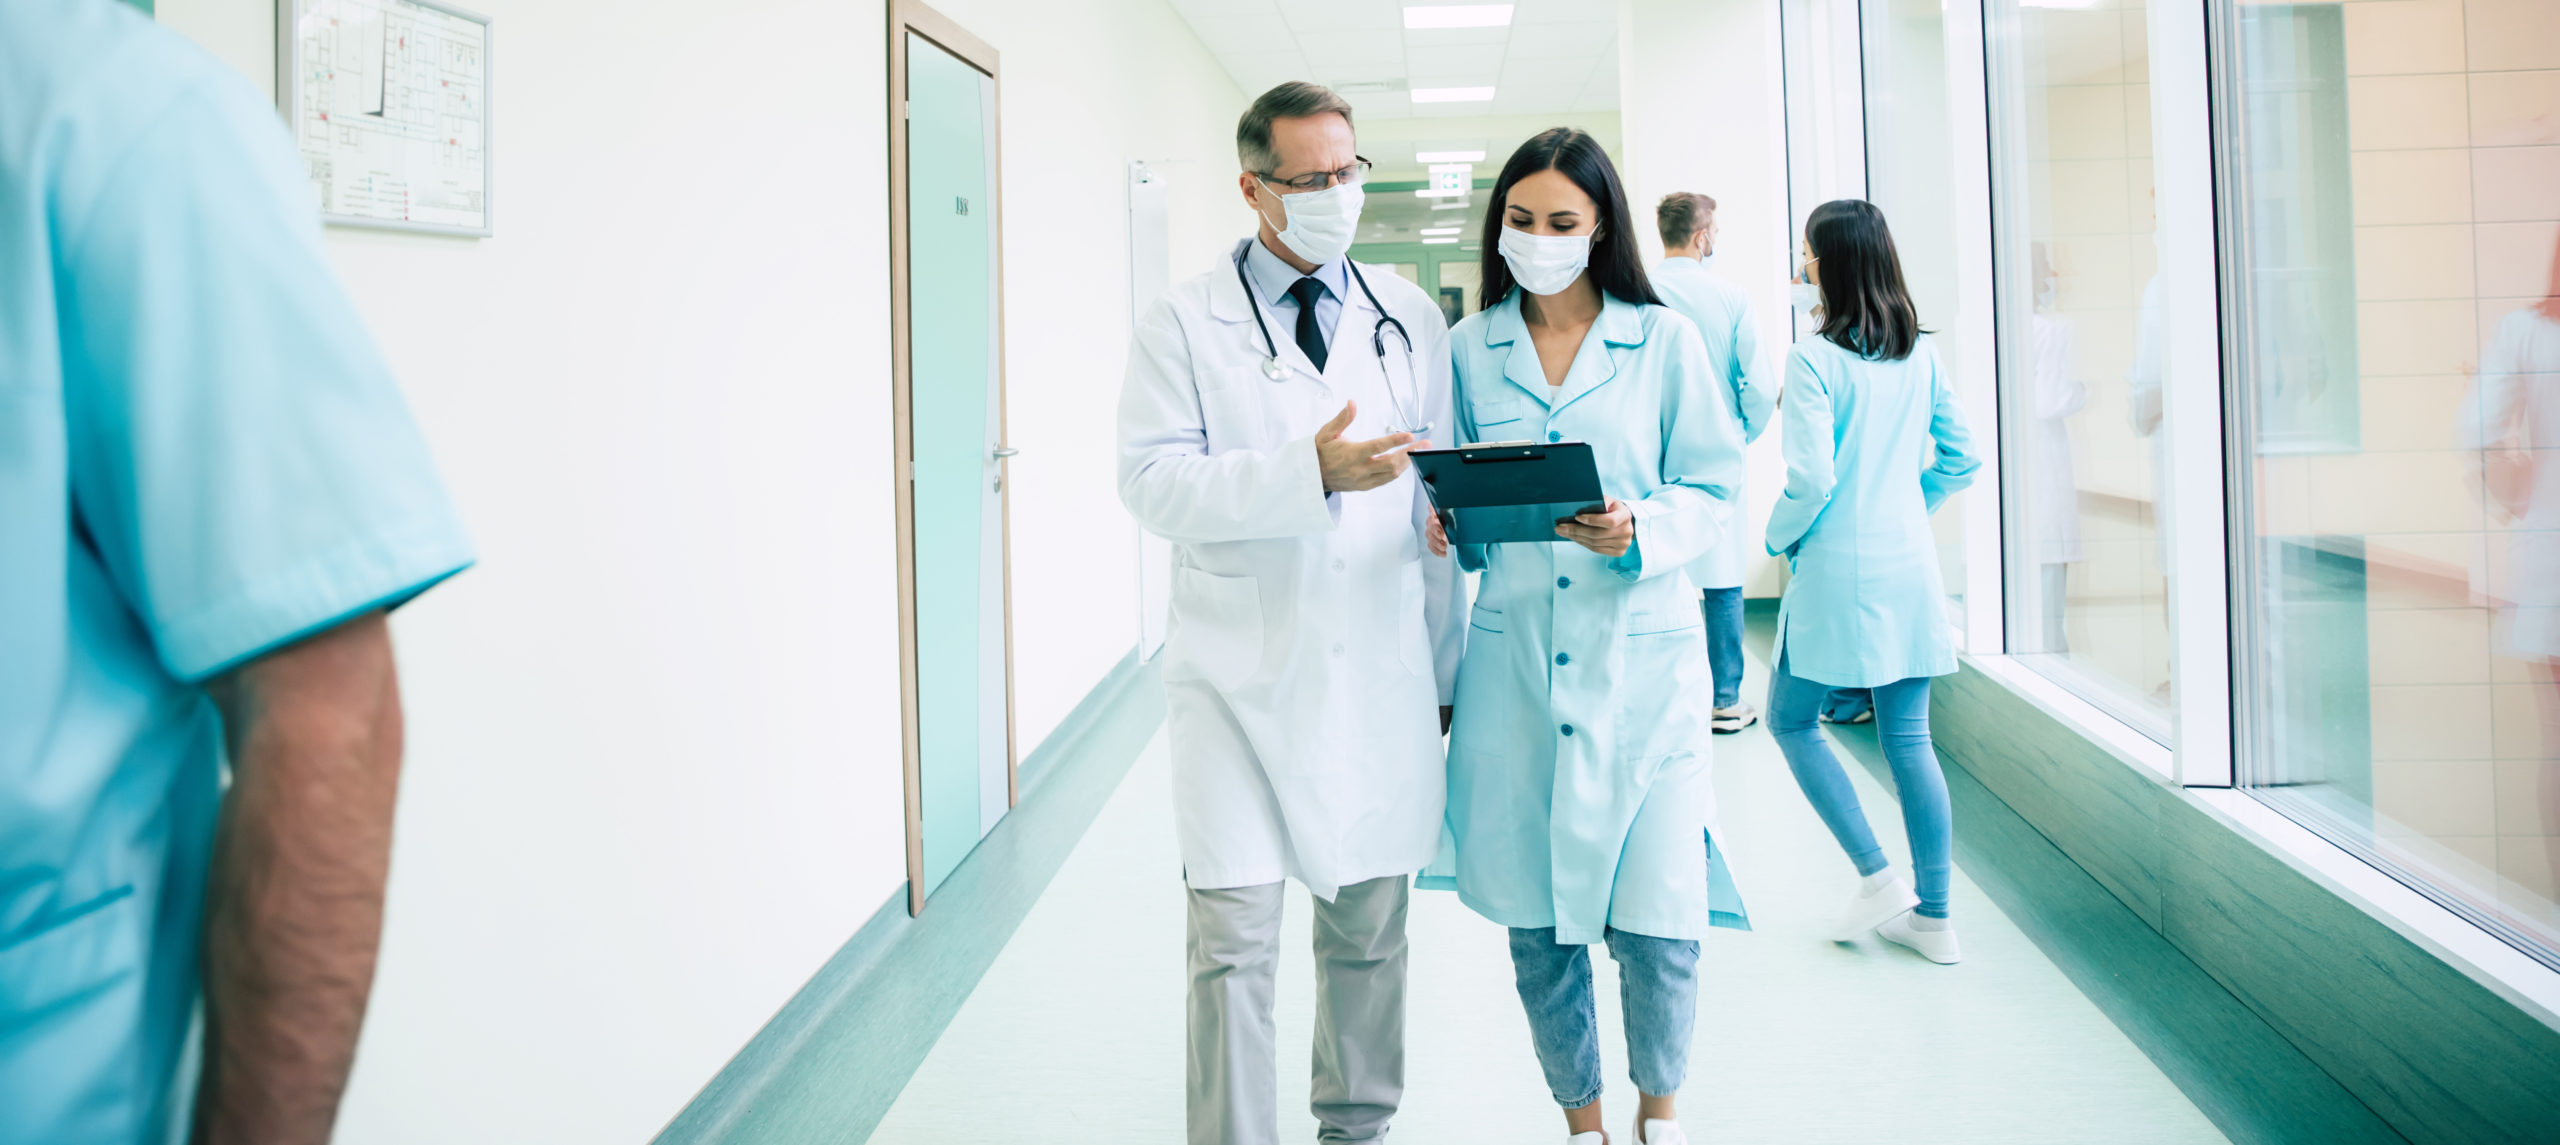 Locum Tenens Adds Flexibility to Your Staffing Strategies